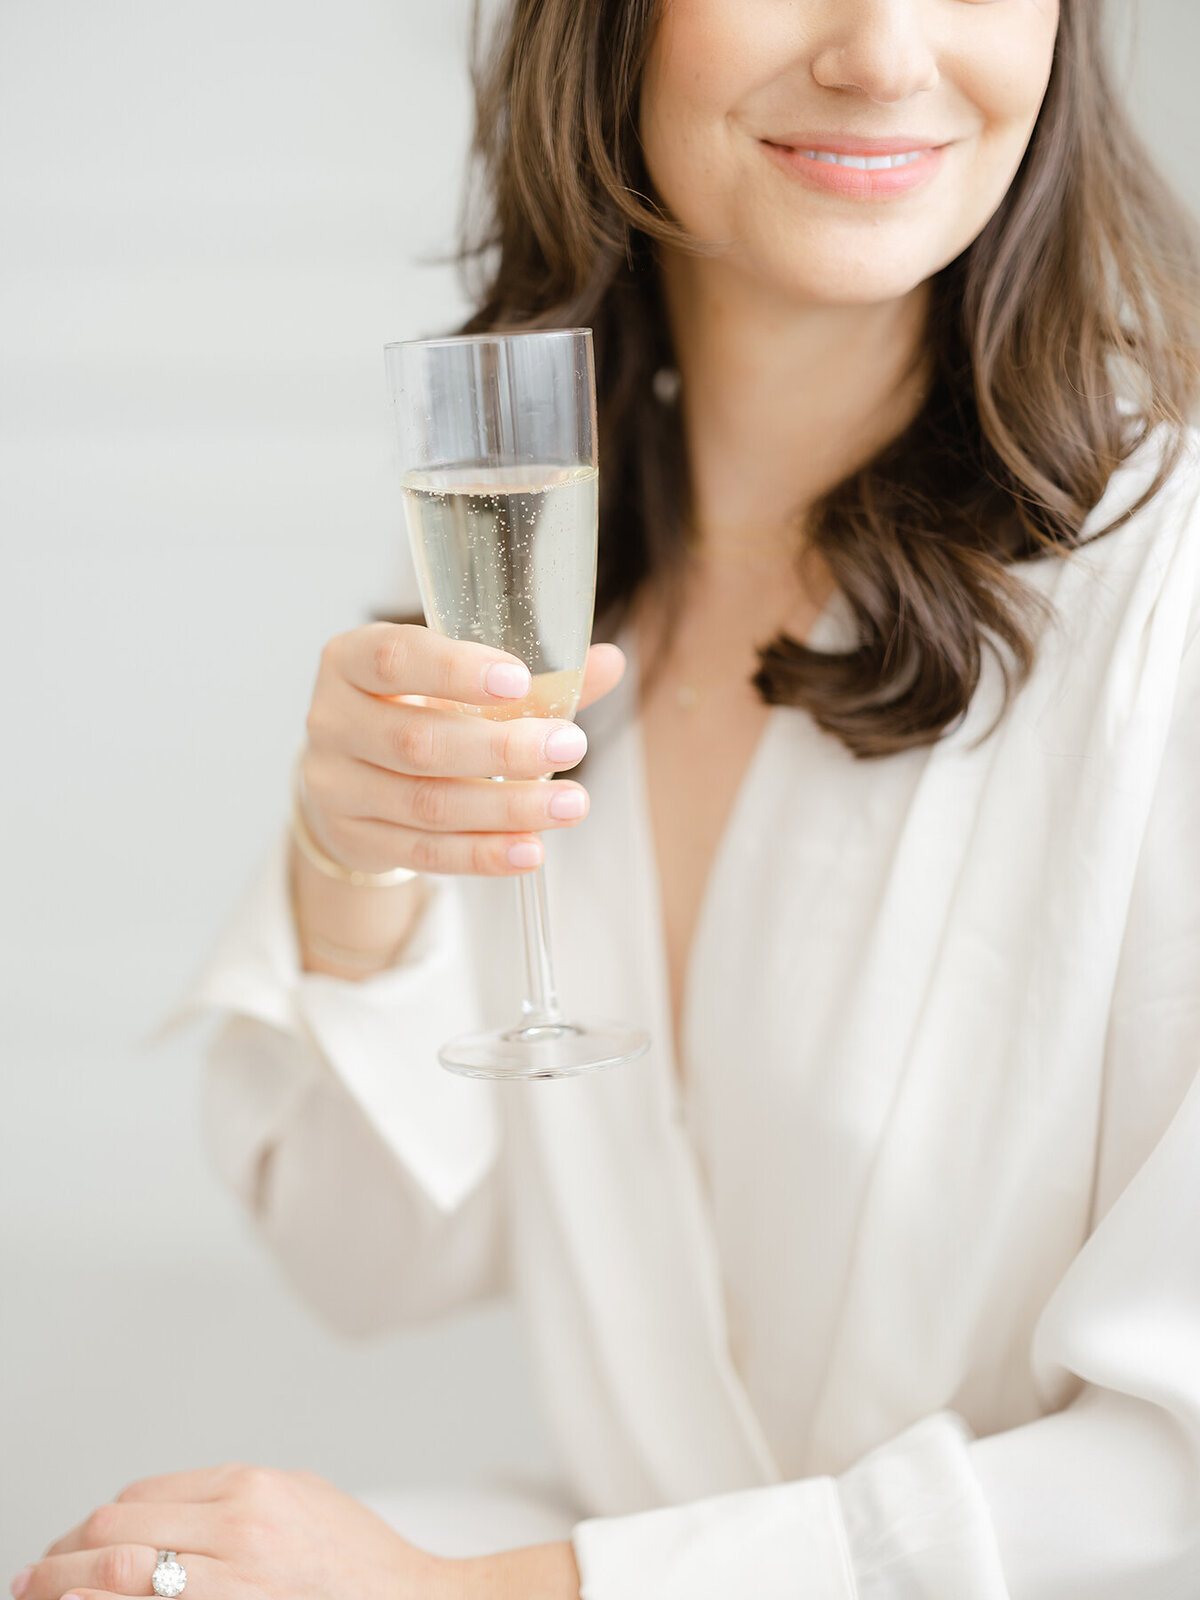 Close up detail shot of a DFW business owner holding a glass of champagne for ehr branding headshots.